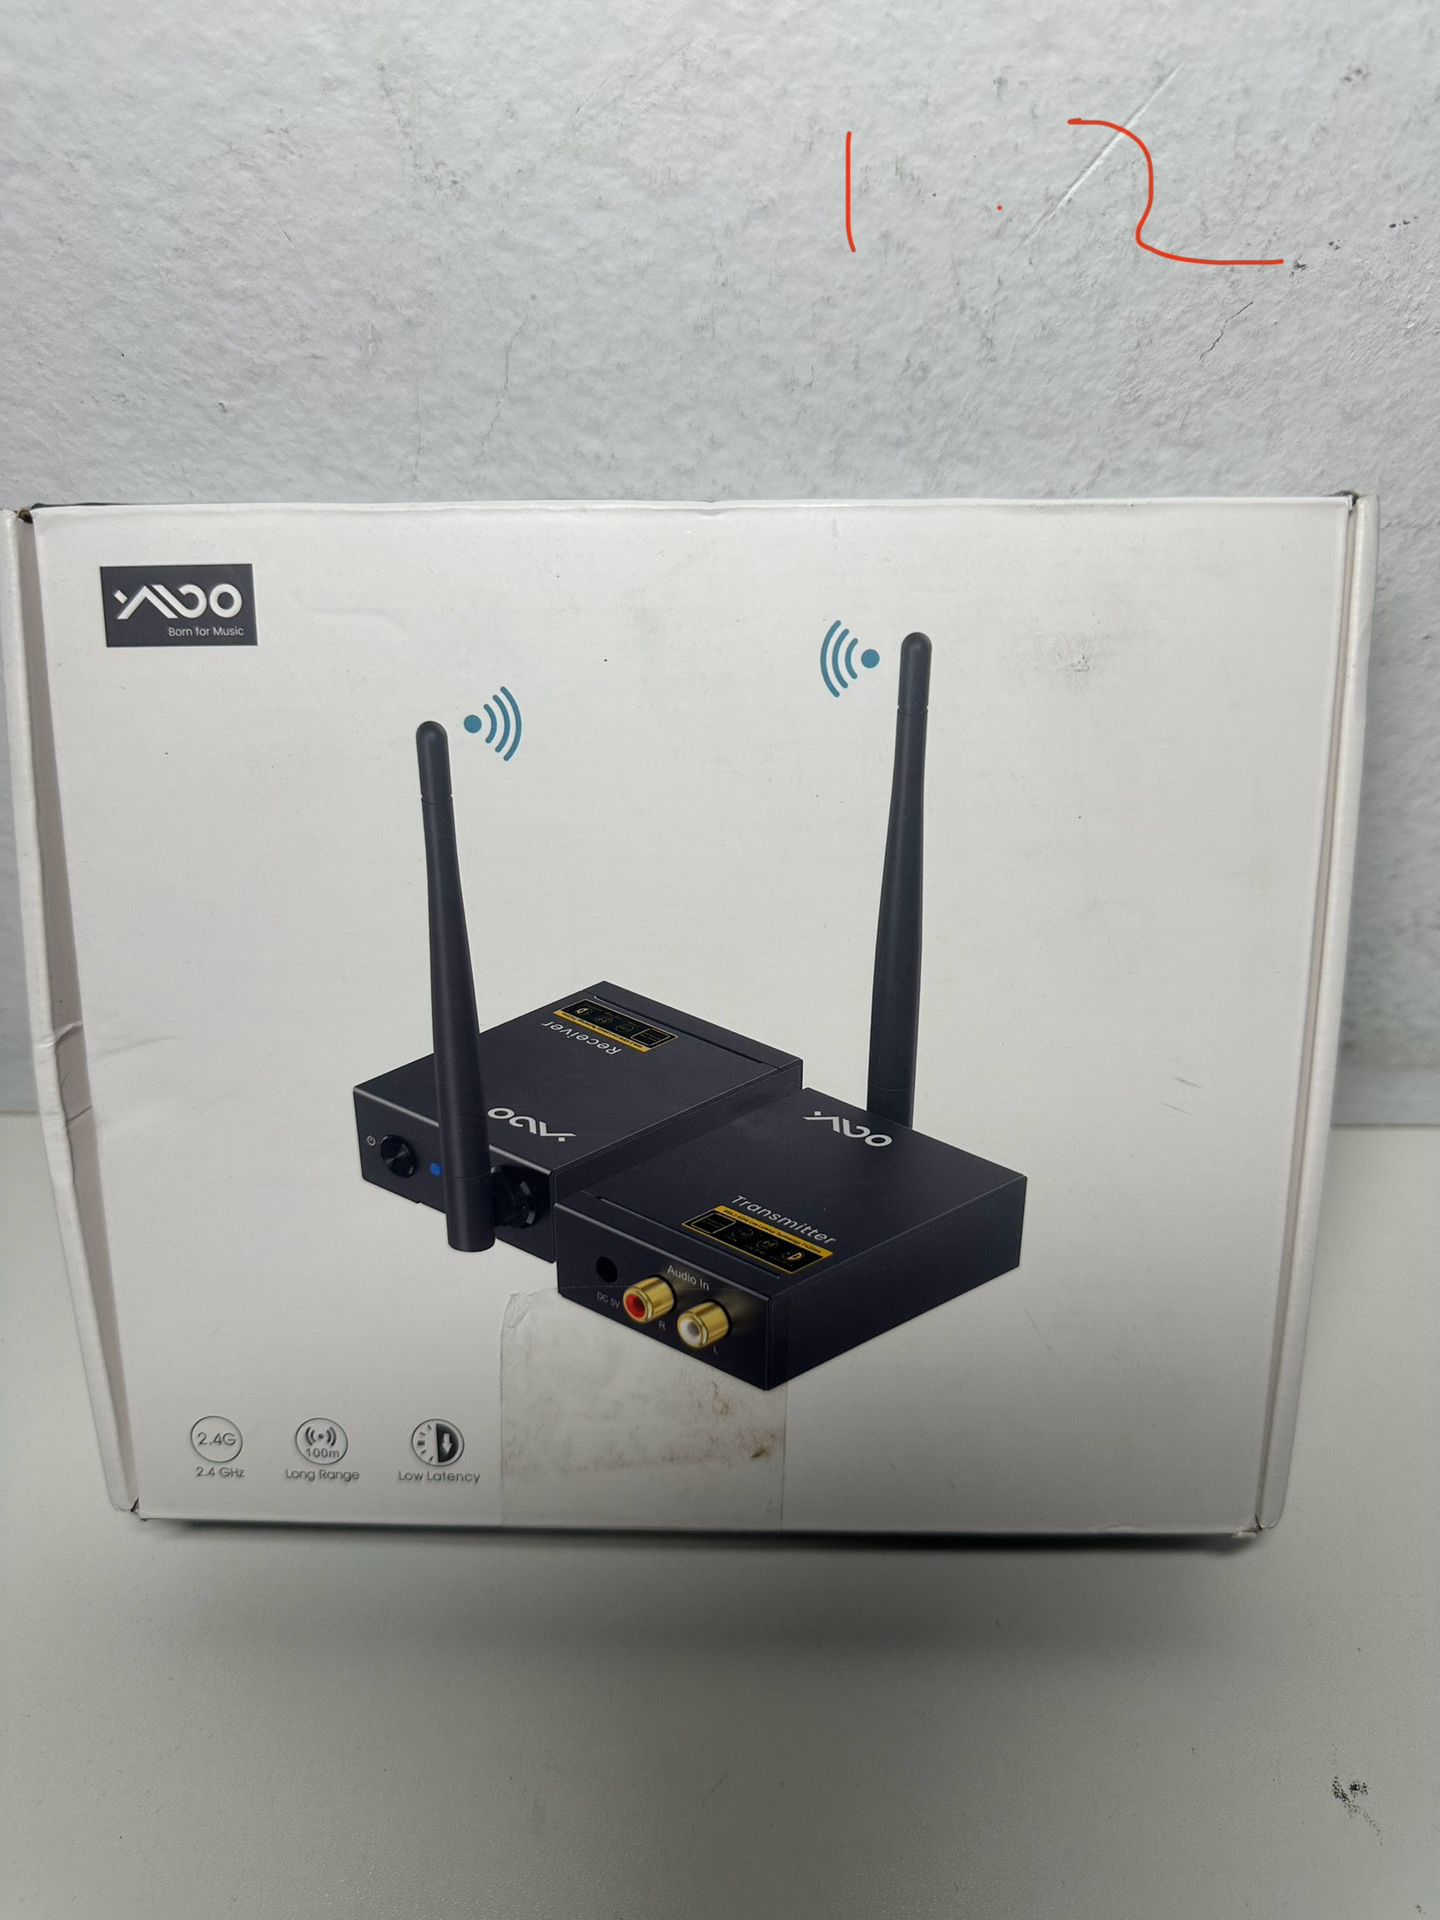 YMOO 2.4Ghz Wireless Audio Transmitter Receiver for TV